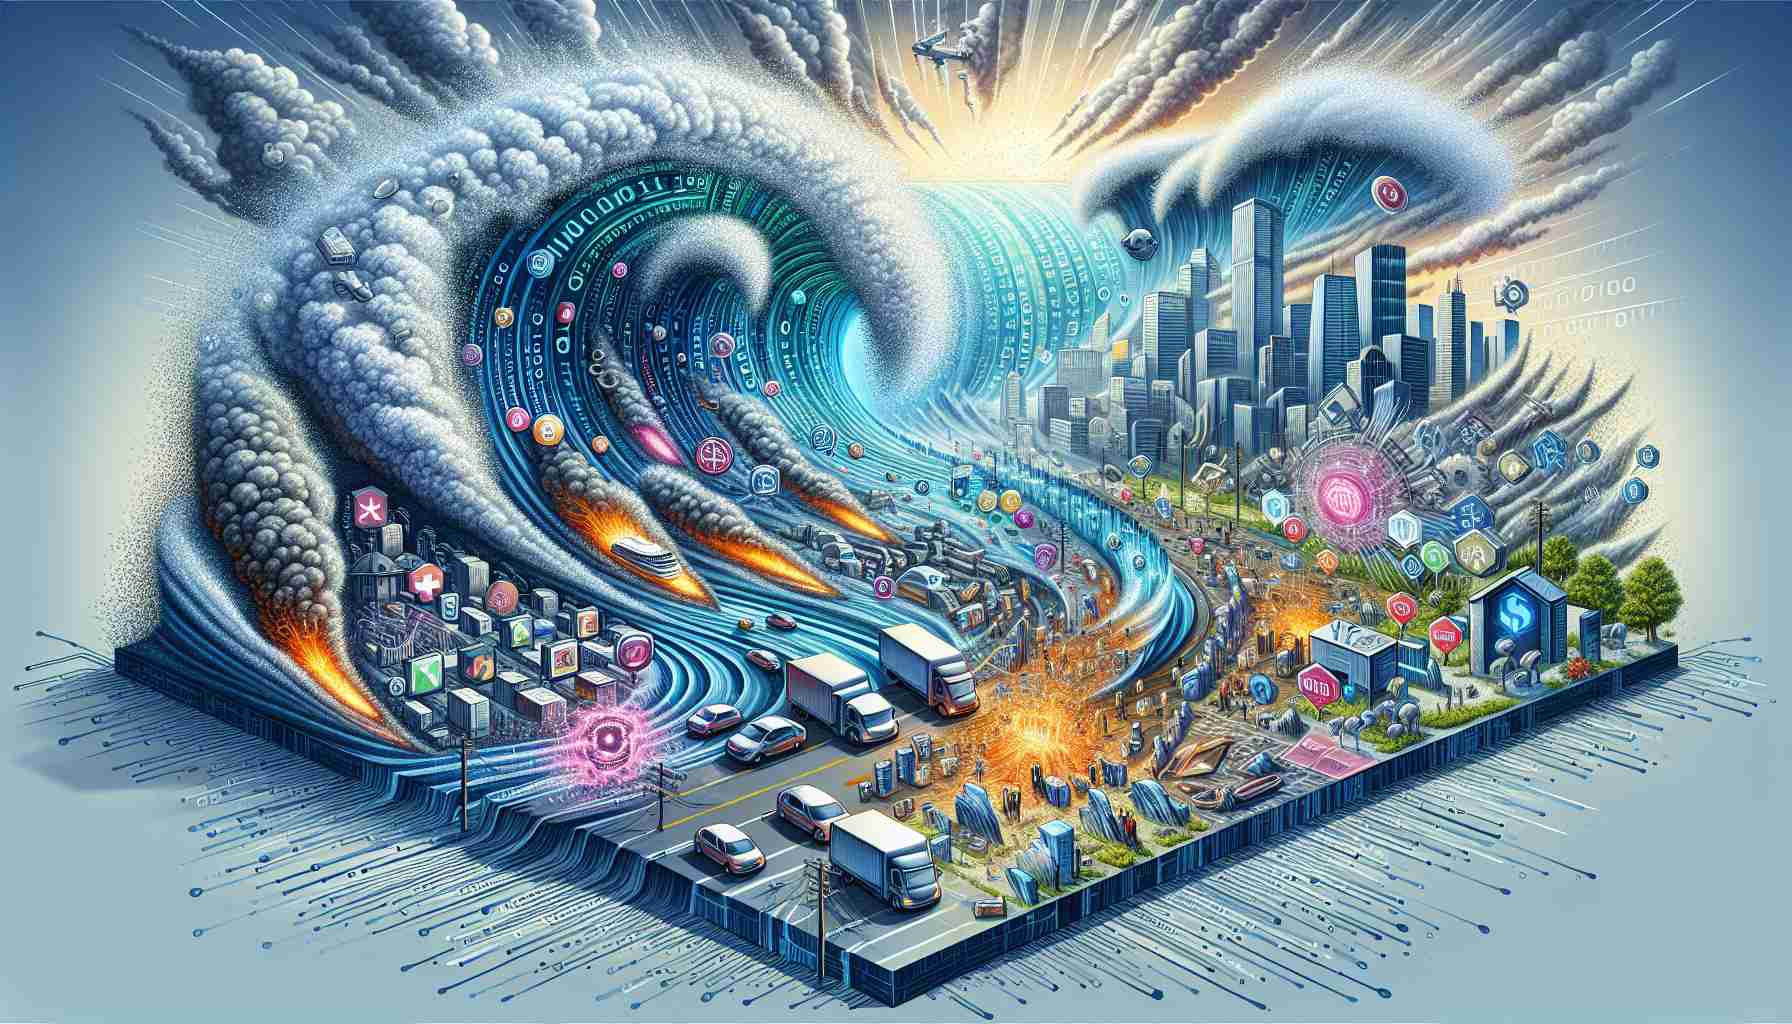 An illustration visualizing the concept of significant technology disruption causing chaos across various sectors. Picture multiple industries such as healthcare, finance, transportation, and education, each represented symbolically. The technology disruption is shown as a powerful wave of digital code or a storm of binary numbers crashing into them, causing visible upheaval. Within the chaos, visualize some signs of positive change - upgraded systems, innovation, and progress amidst the upheaval. Focus on realistic detailing and high definition quality to give a deep understanding of the overall impact.